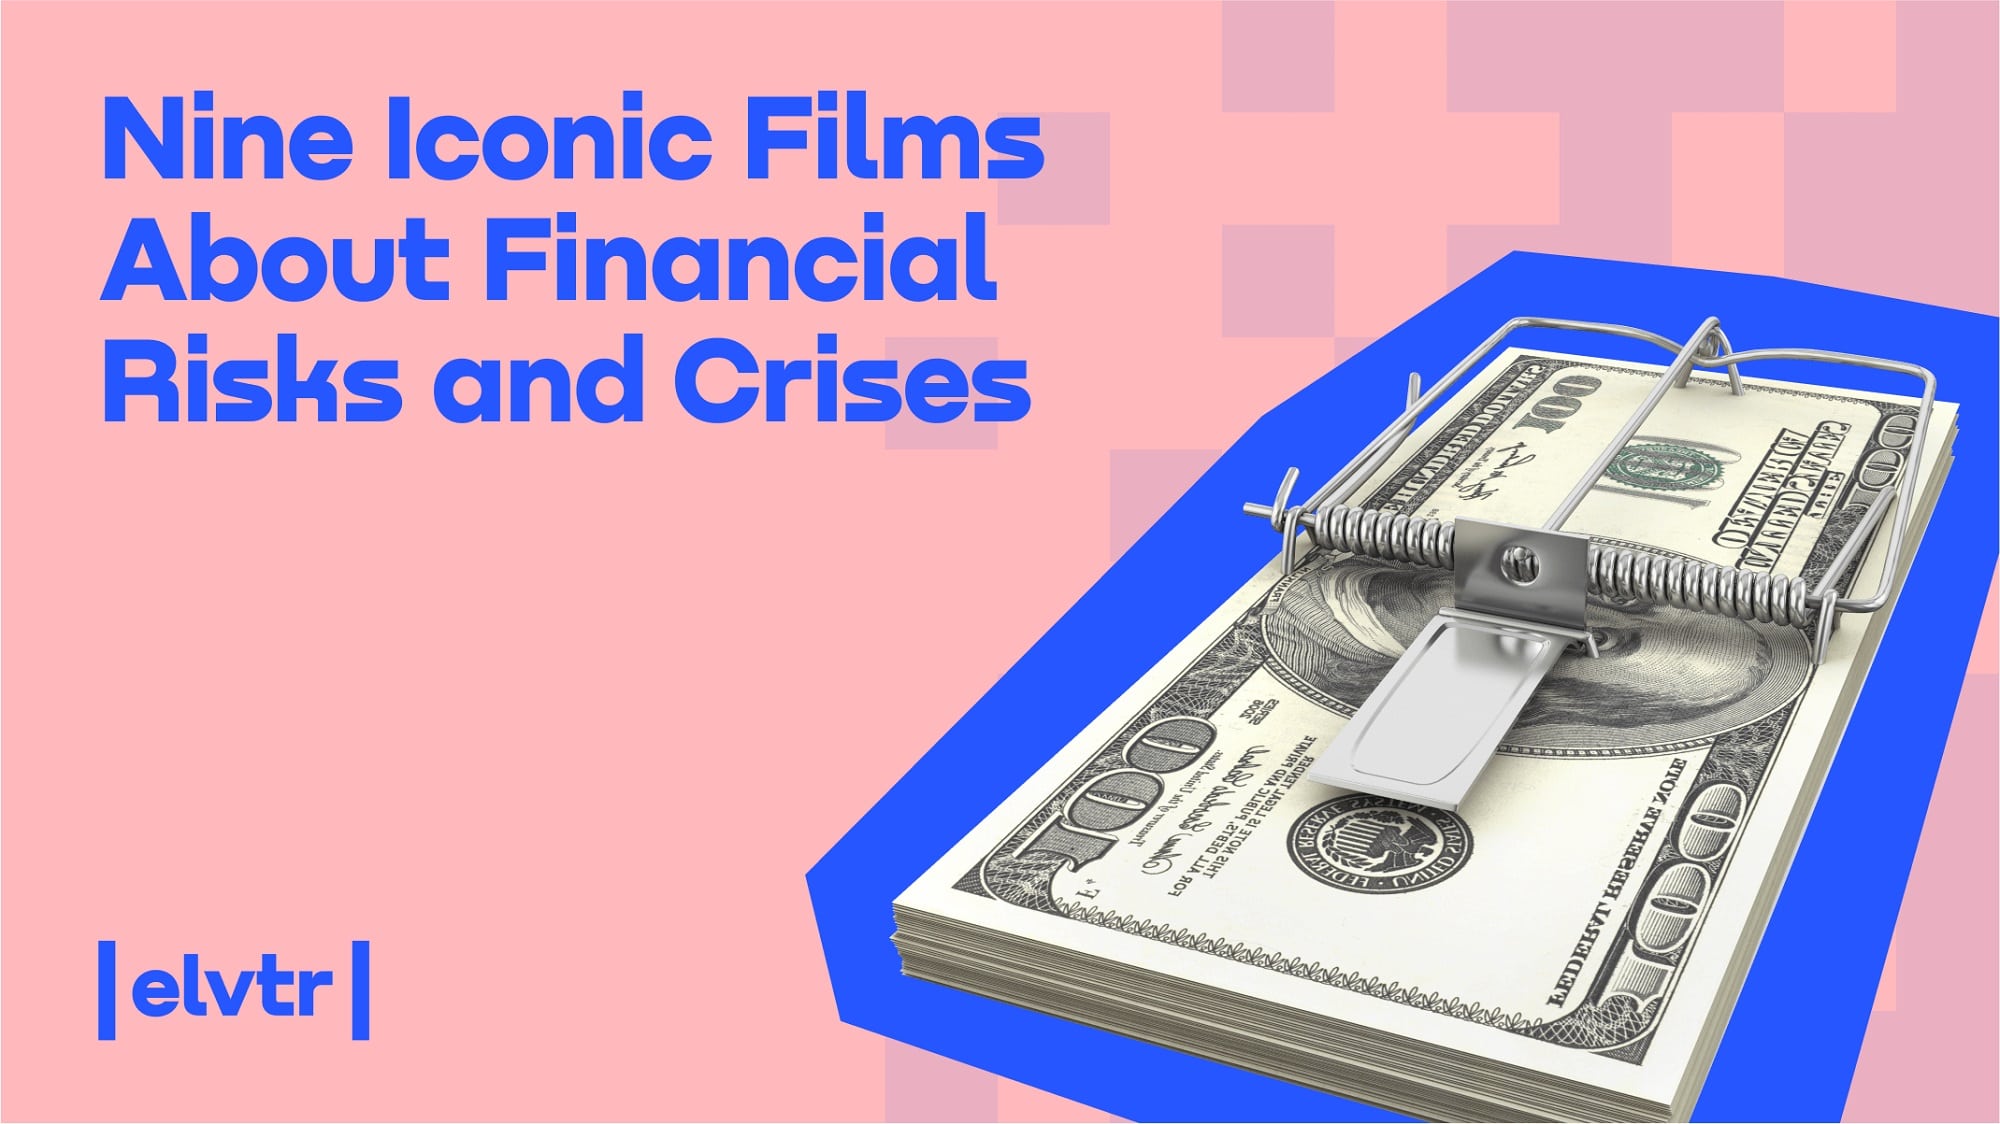 Nine Iconic Films About Financial Risks and Crises image